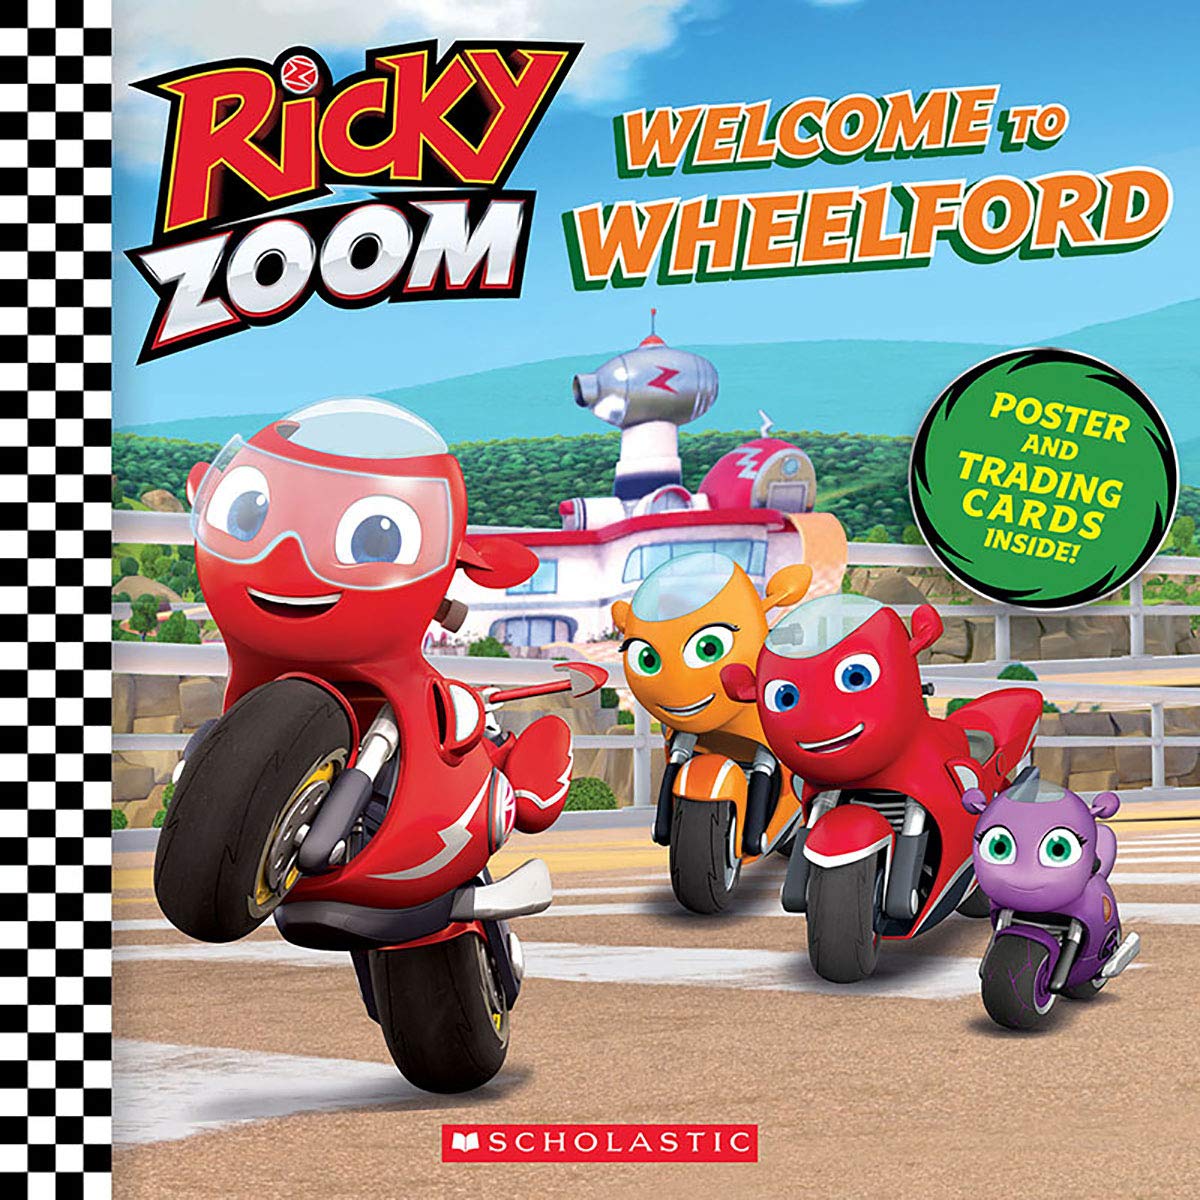 Ricky Zoom Welcome to Wheelford: Poster and Trading Cards Inside